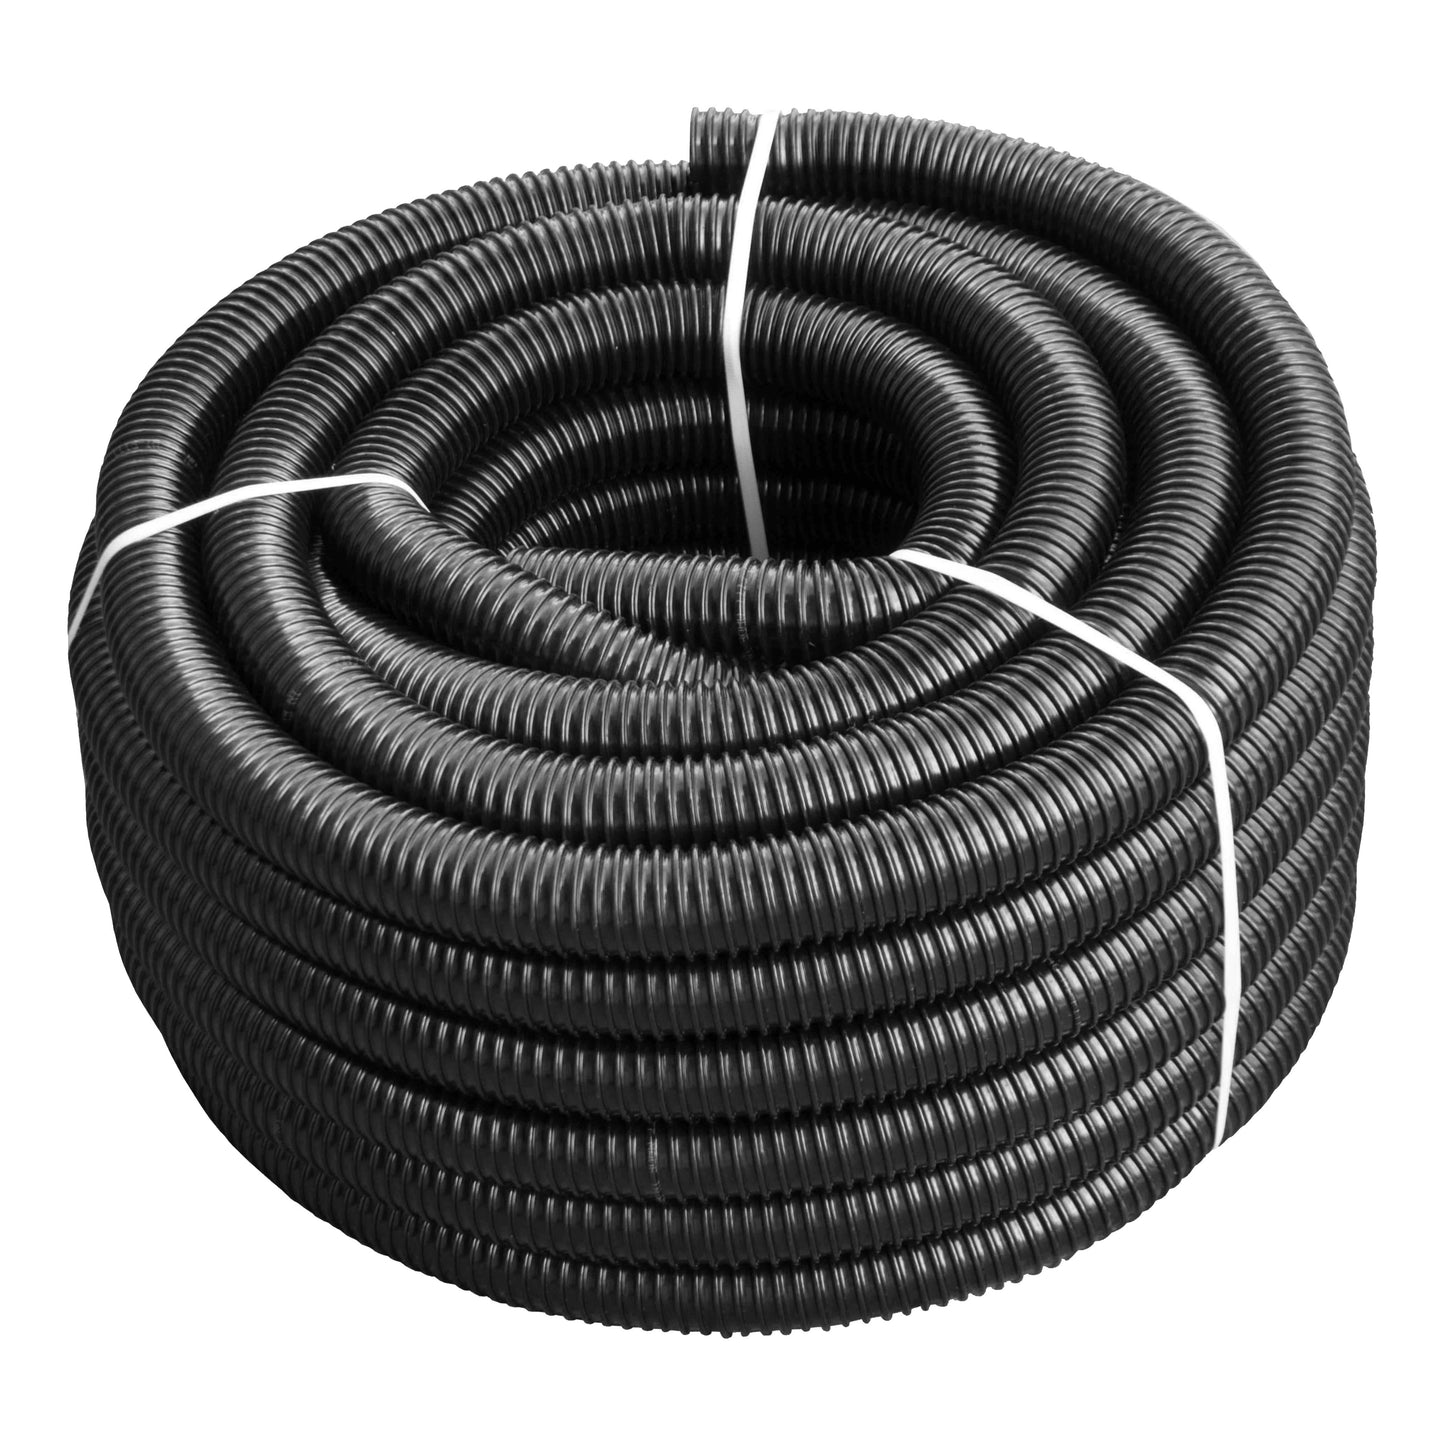 CORRUGATED PIPE 1" (25mm) COIL OF 30M